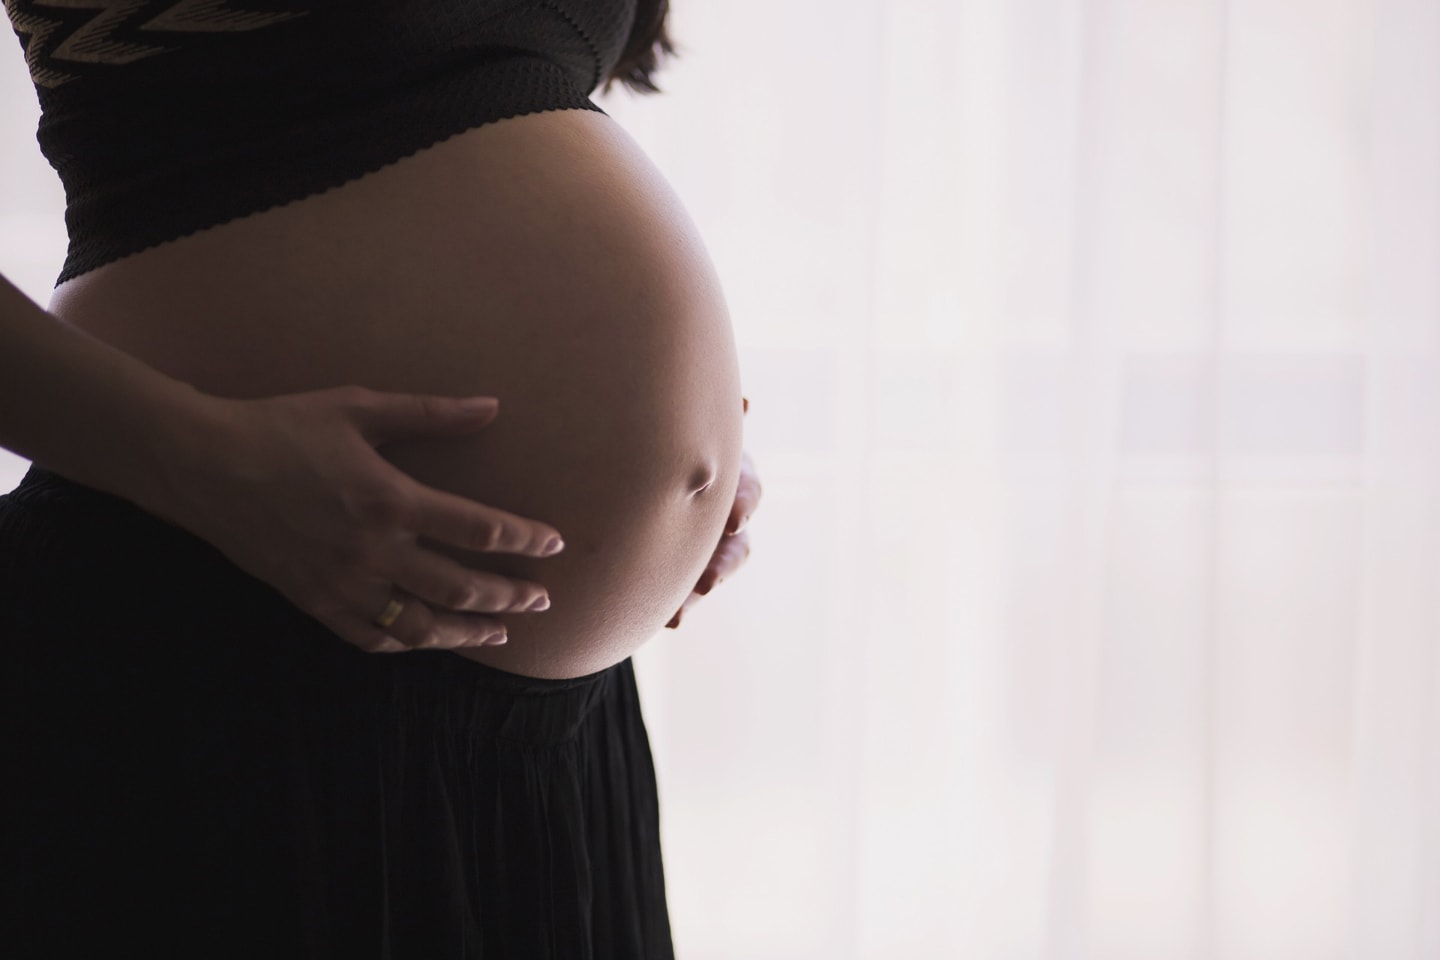 Psychological changes during pregnancy: An emotional upheaval